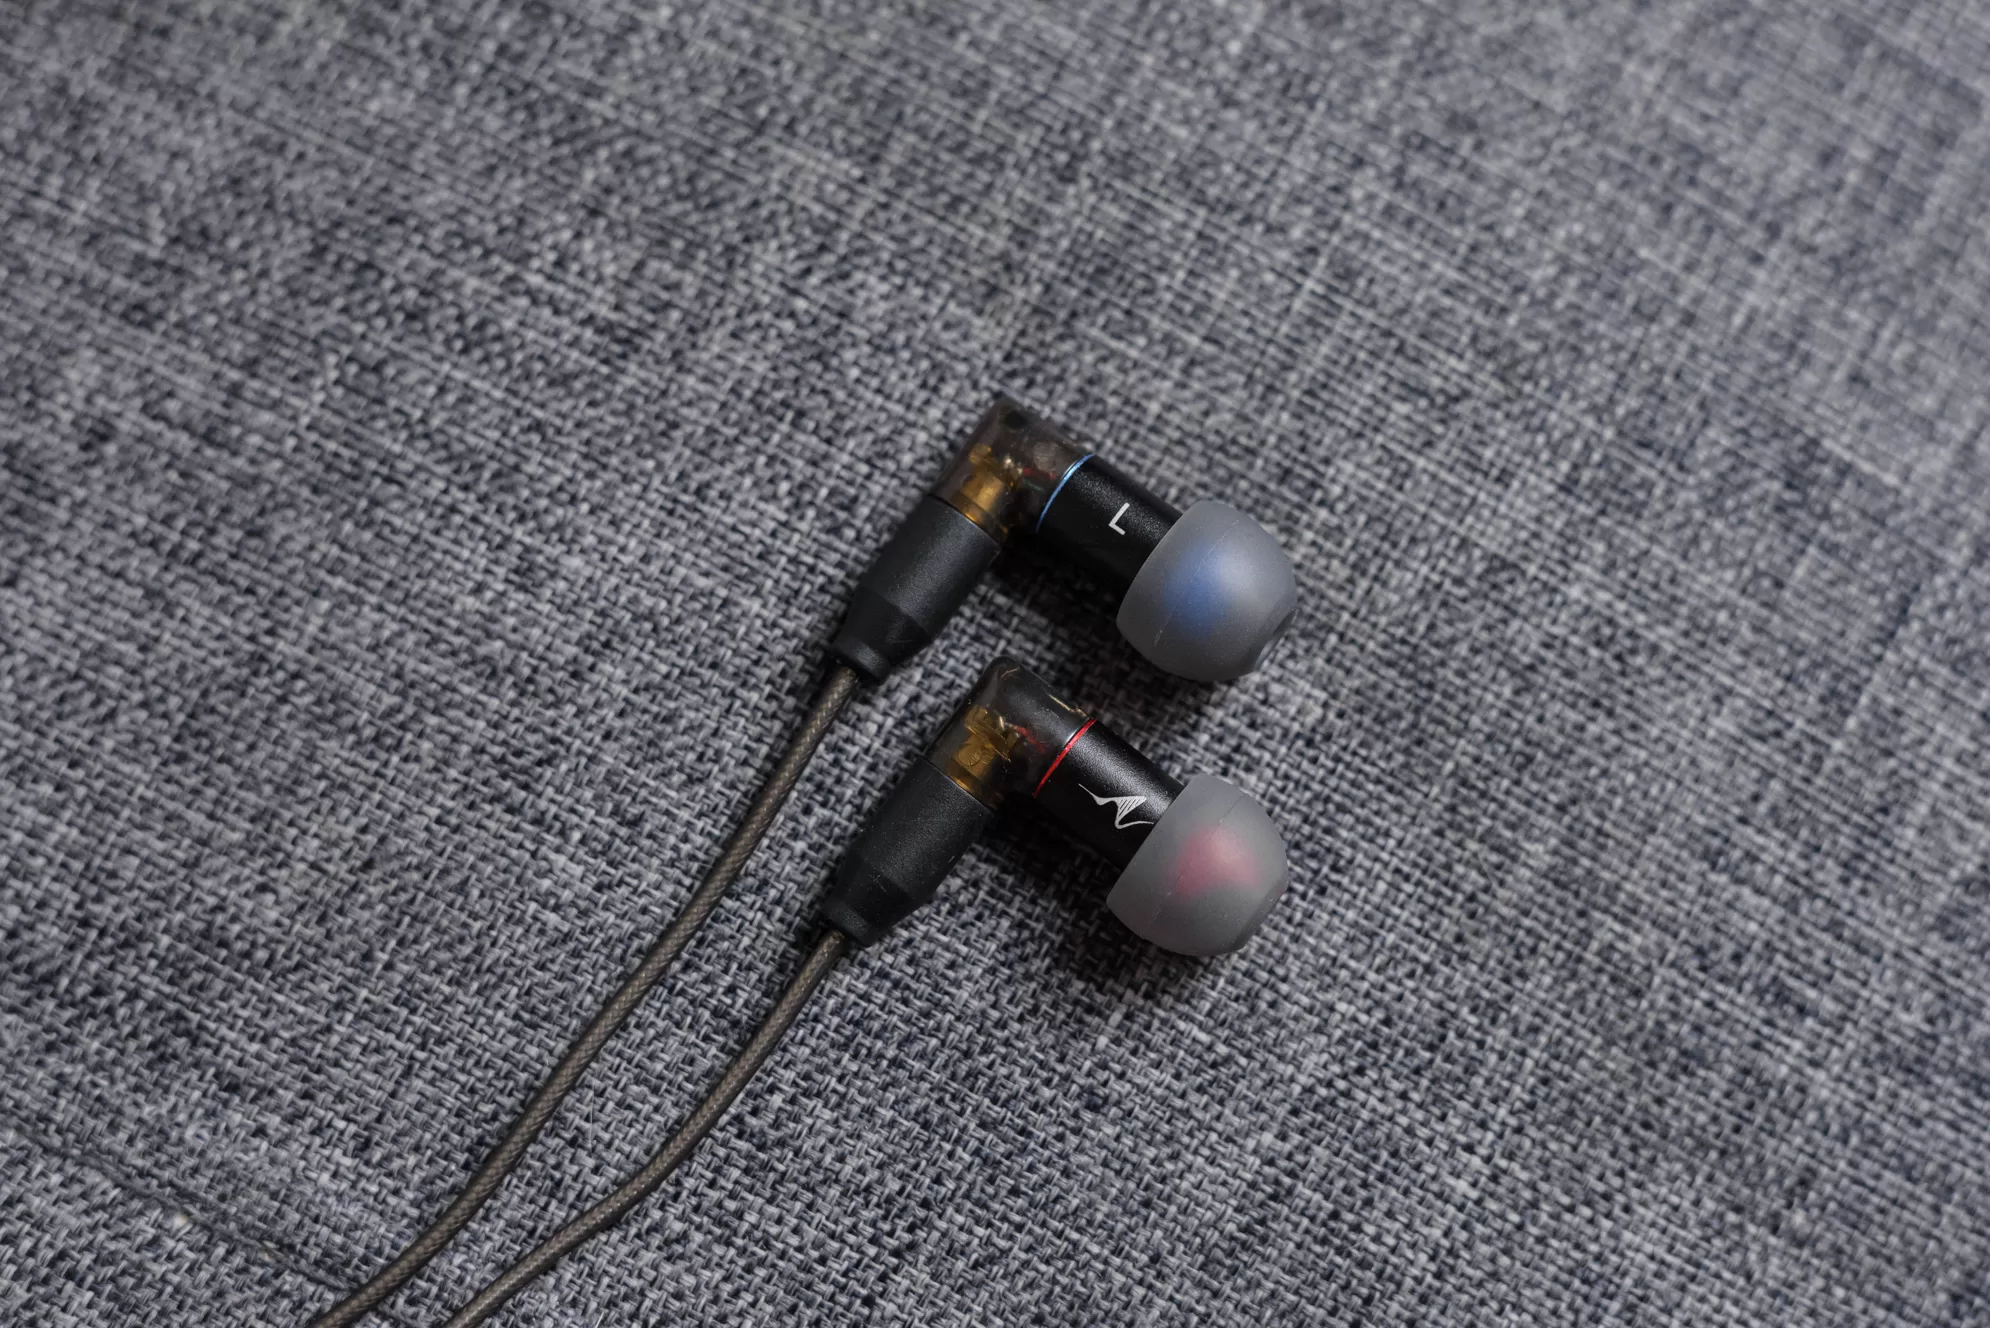 Review: Akoustyx S-6 Earphones